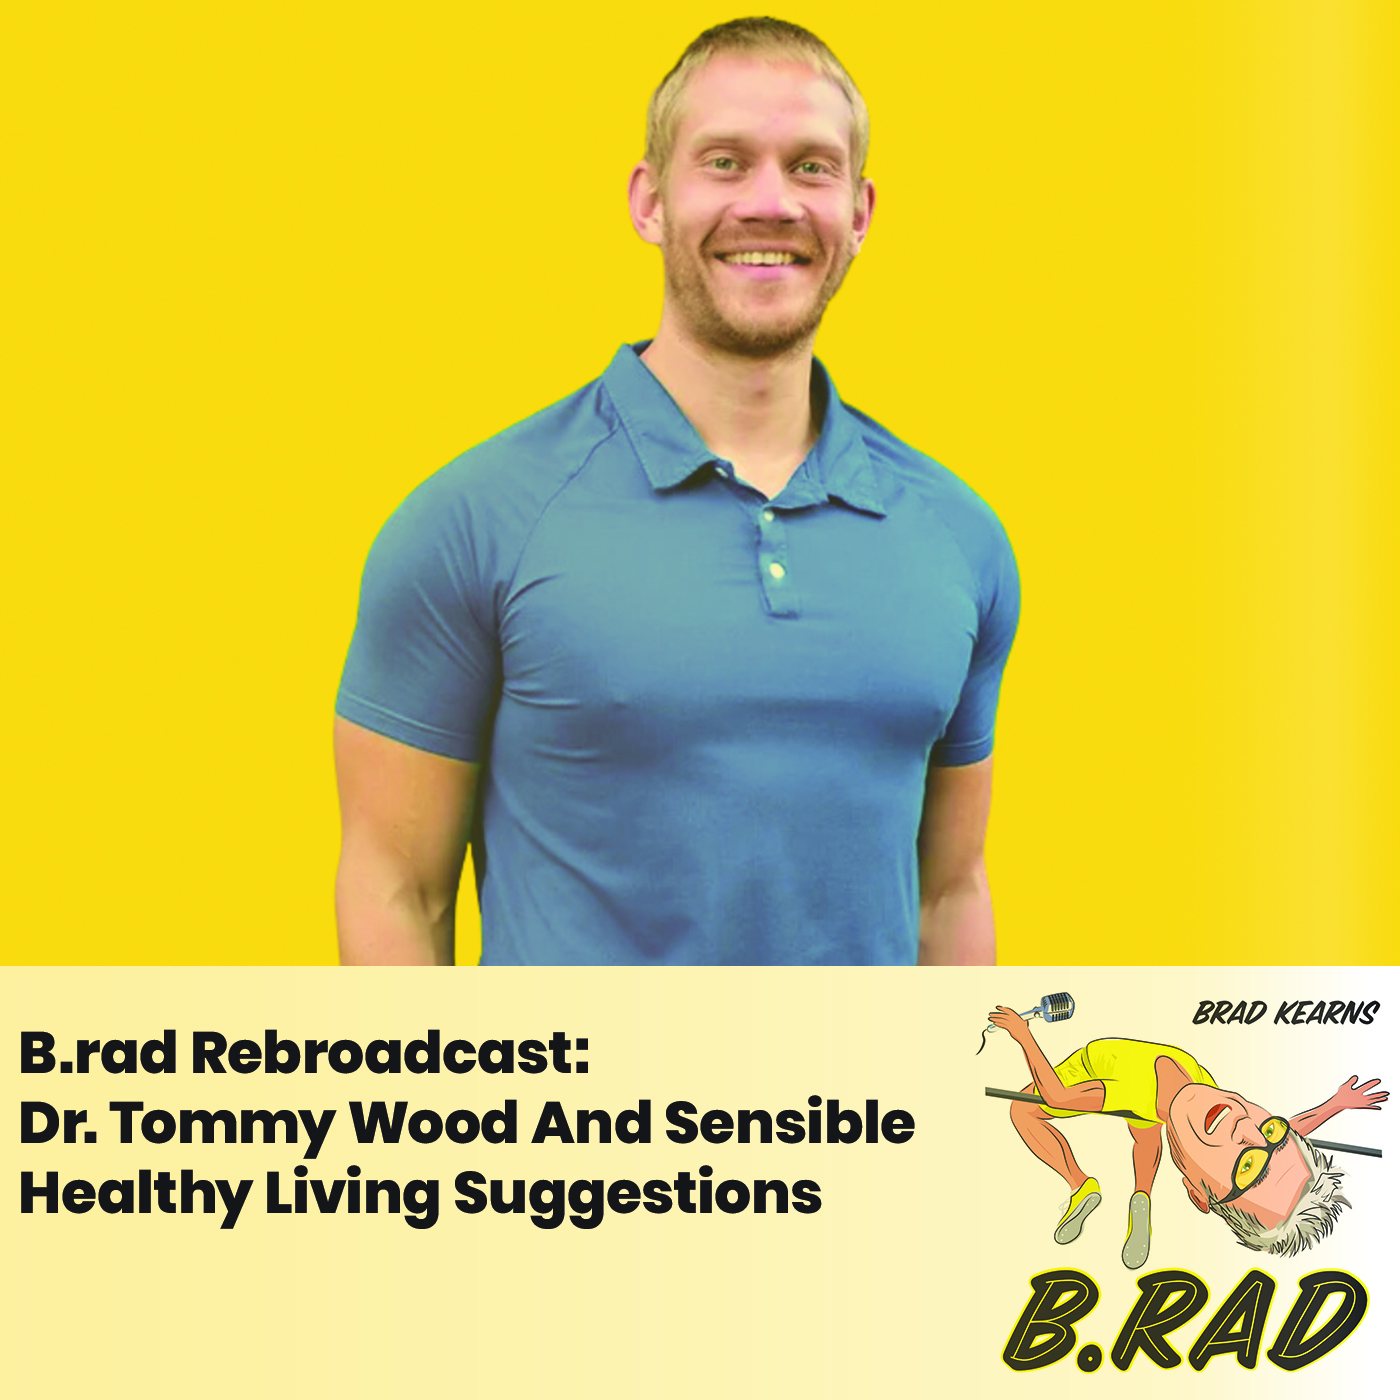 Dr. Tommy Wood And Sensible Healthy Living Suggestions